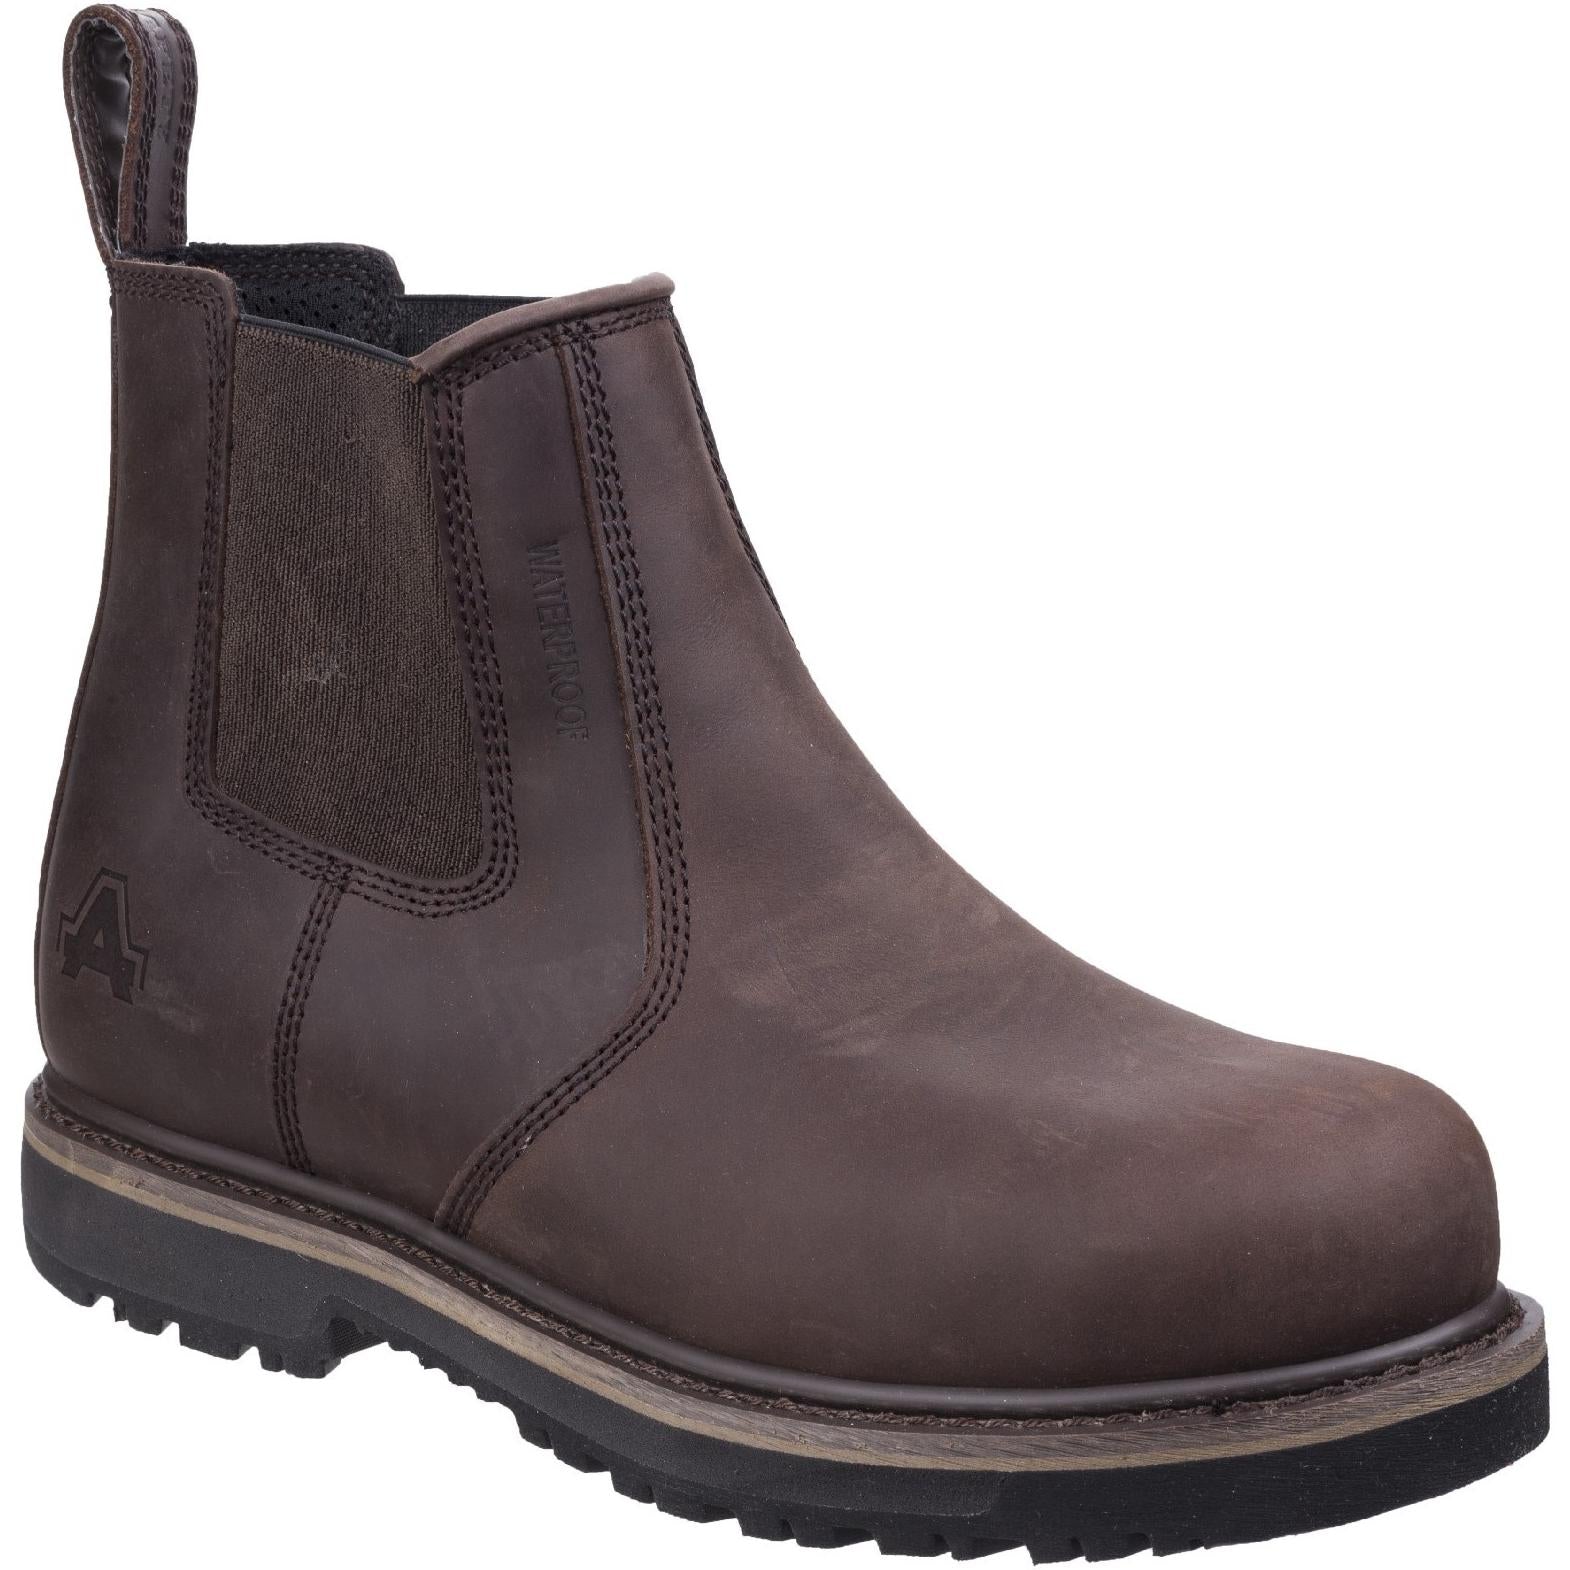 Amblers Safety AS231 Dealer Safety Boot